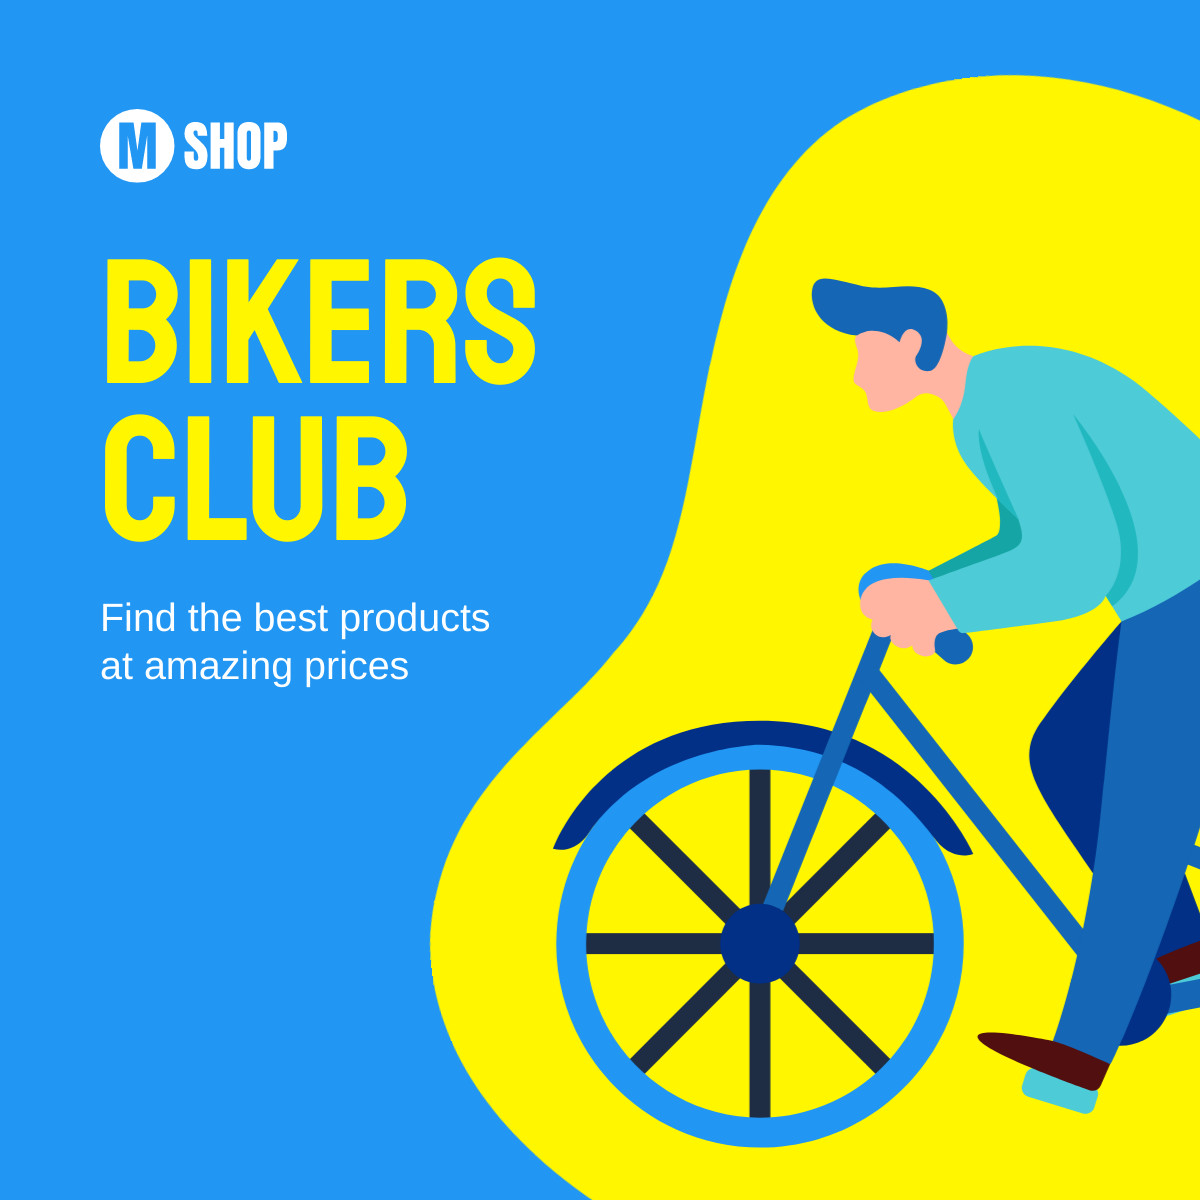 Bikers Club Products for Amazing Prices 